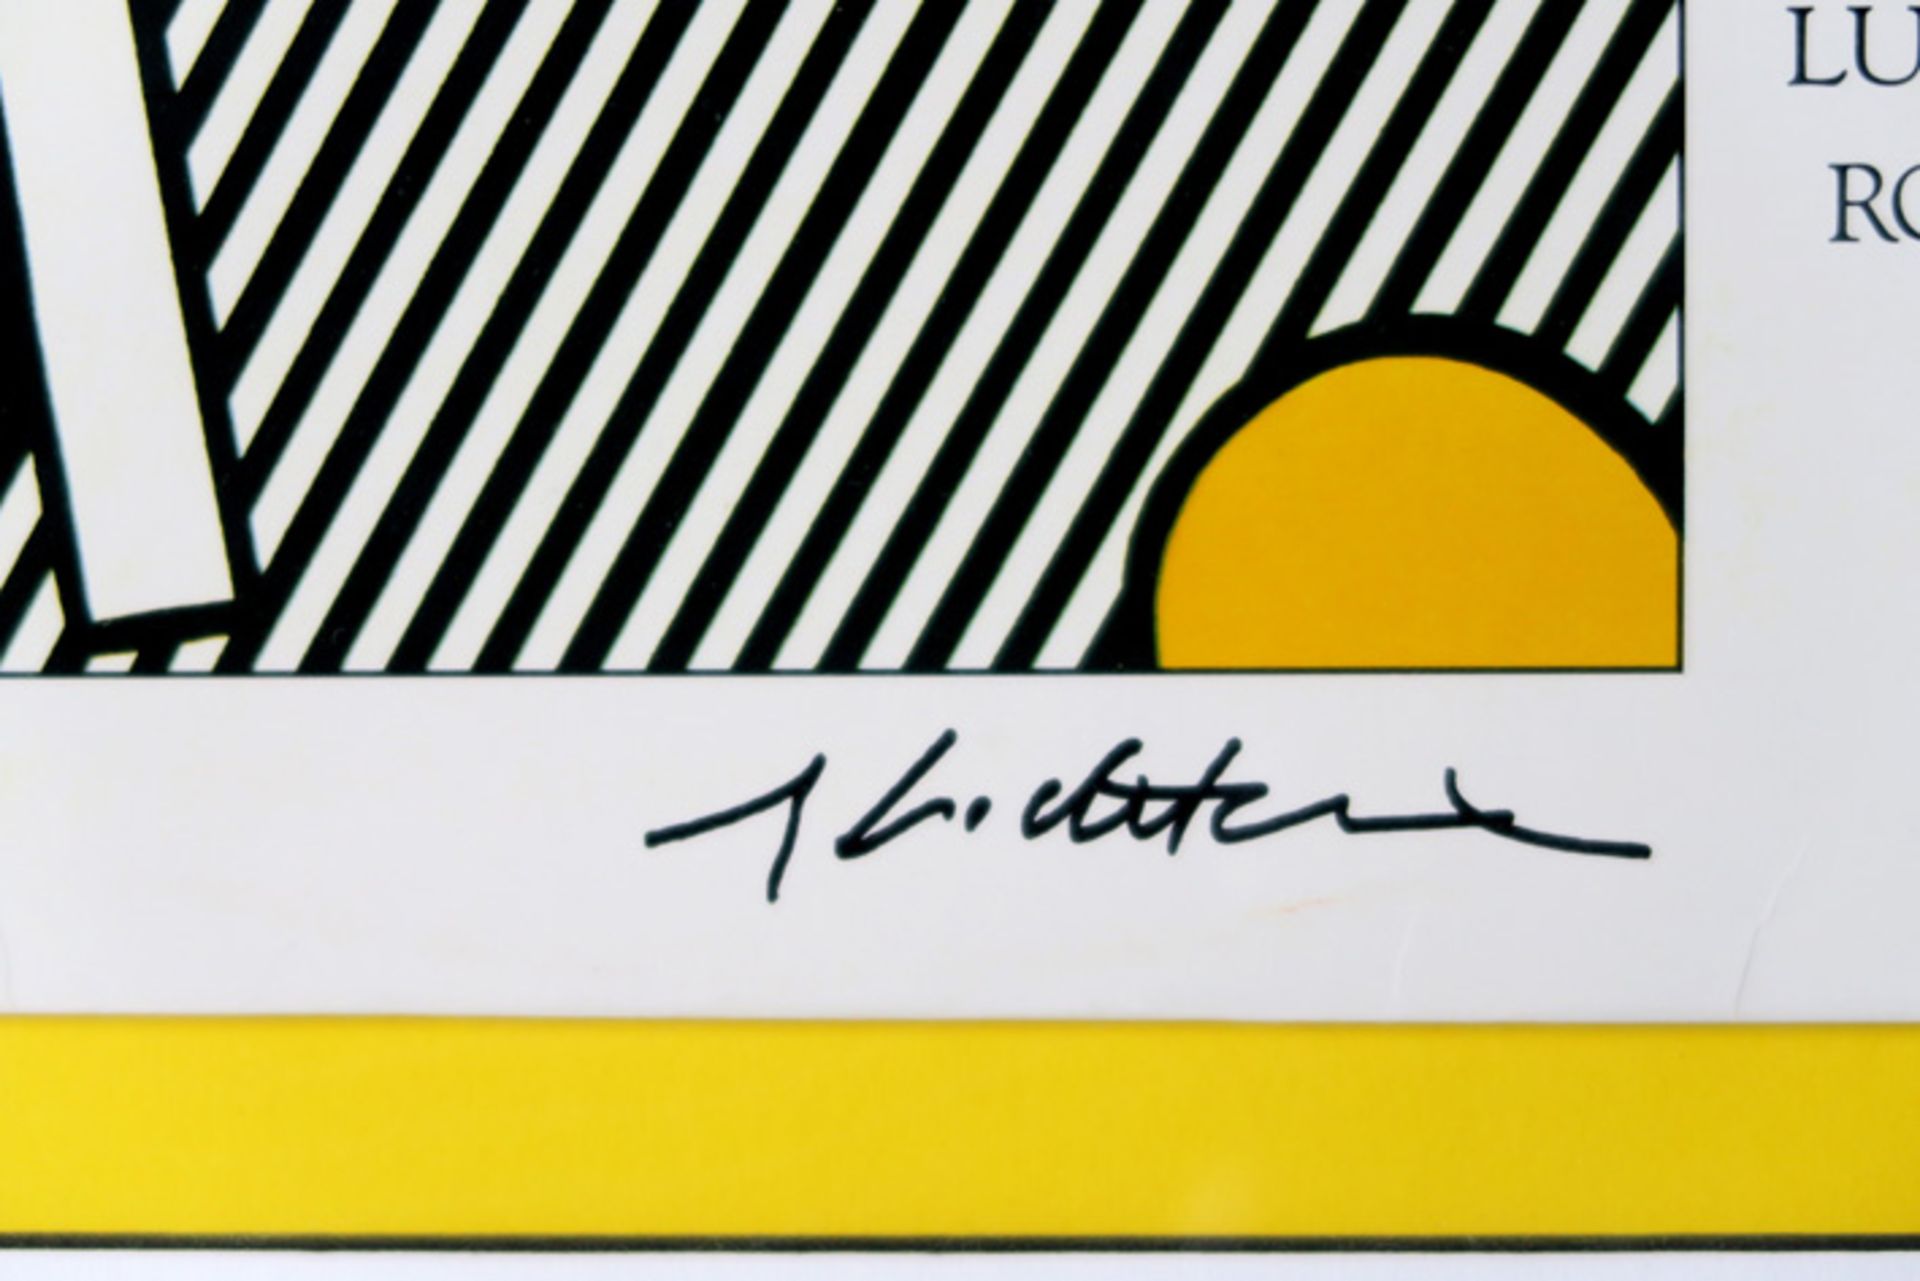 Roy Lichtenstein signed recordcover designed by Lichtenstein for and with the record "Piano Concerto - Bild 2 aus 2